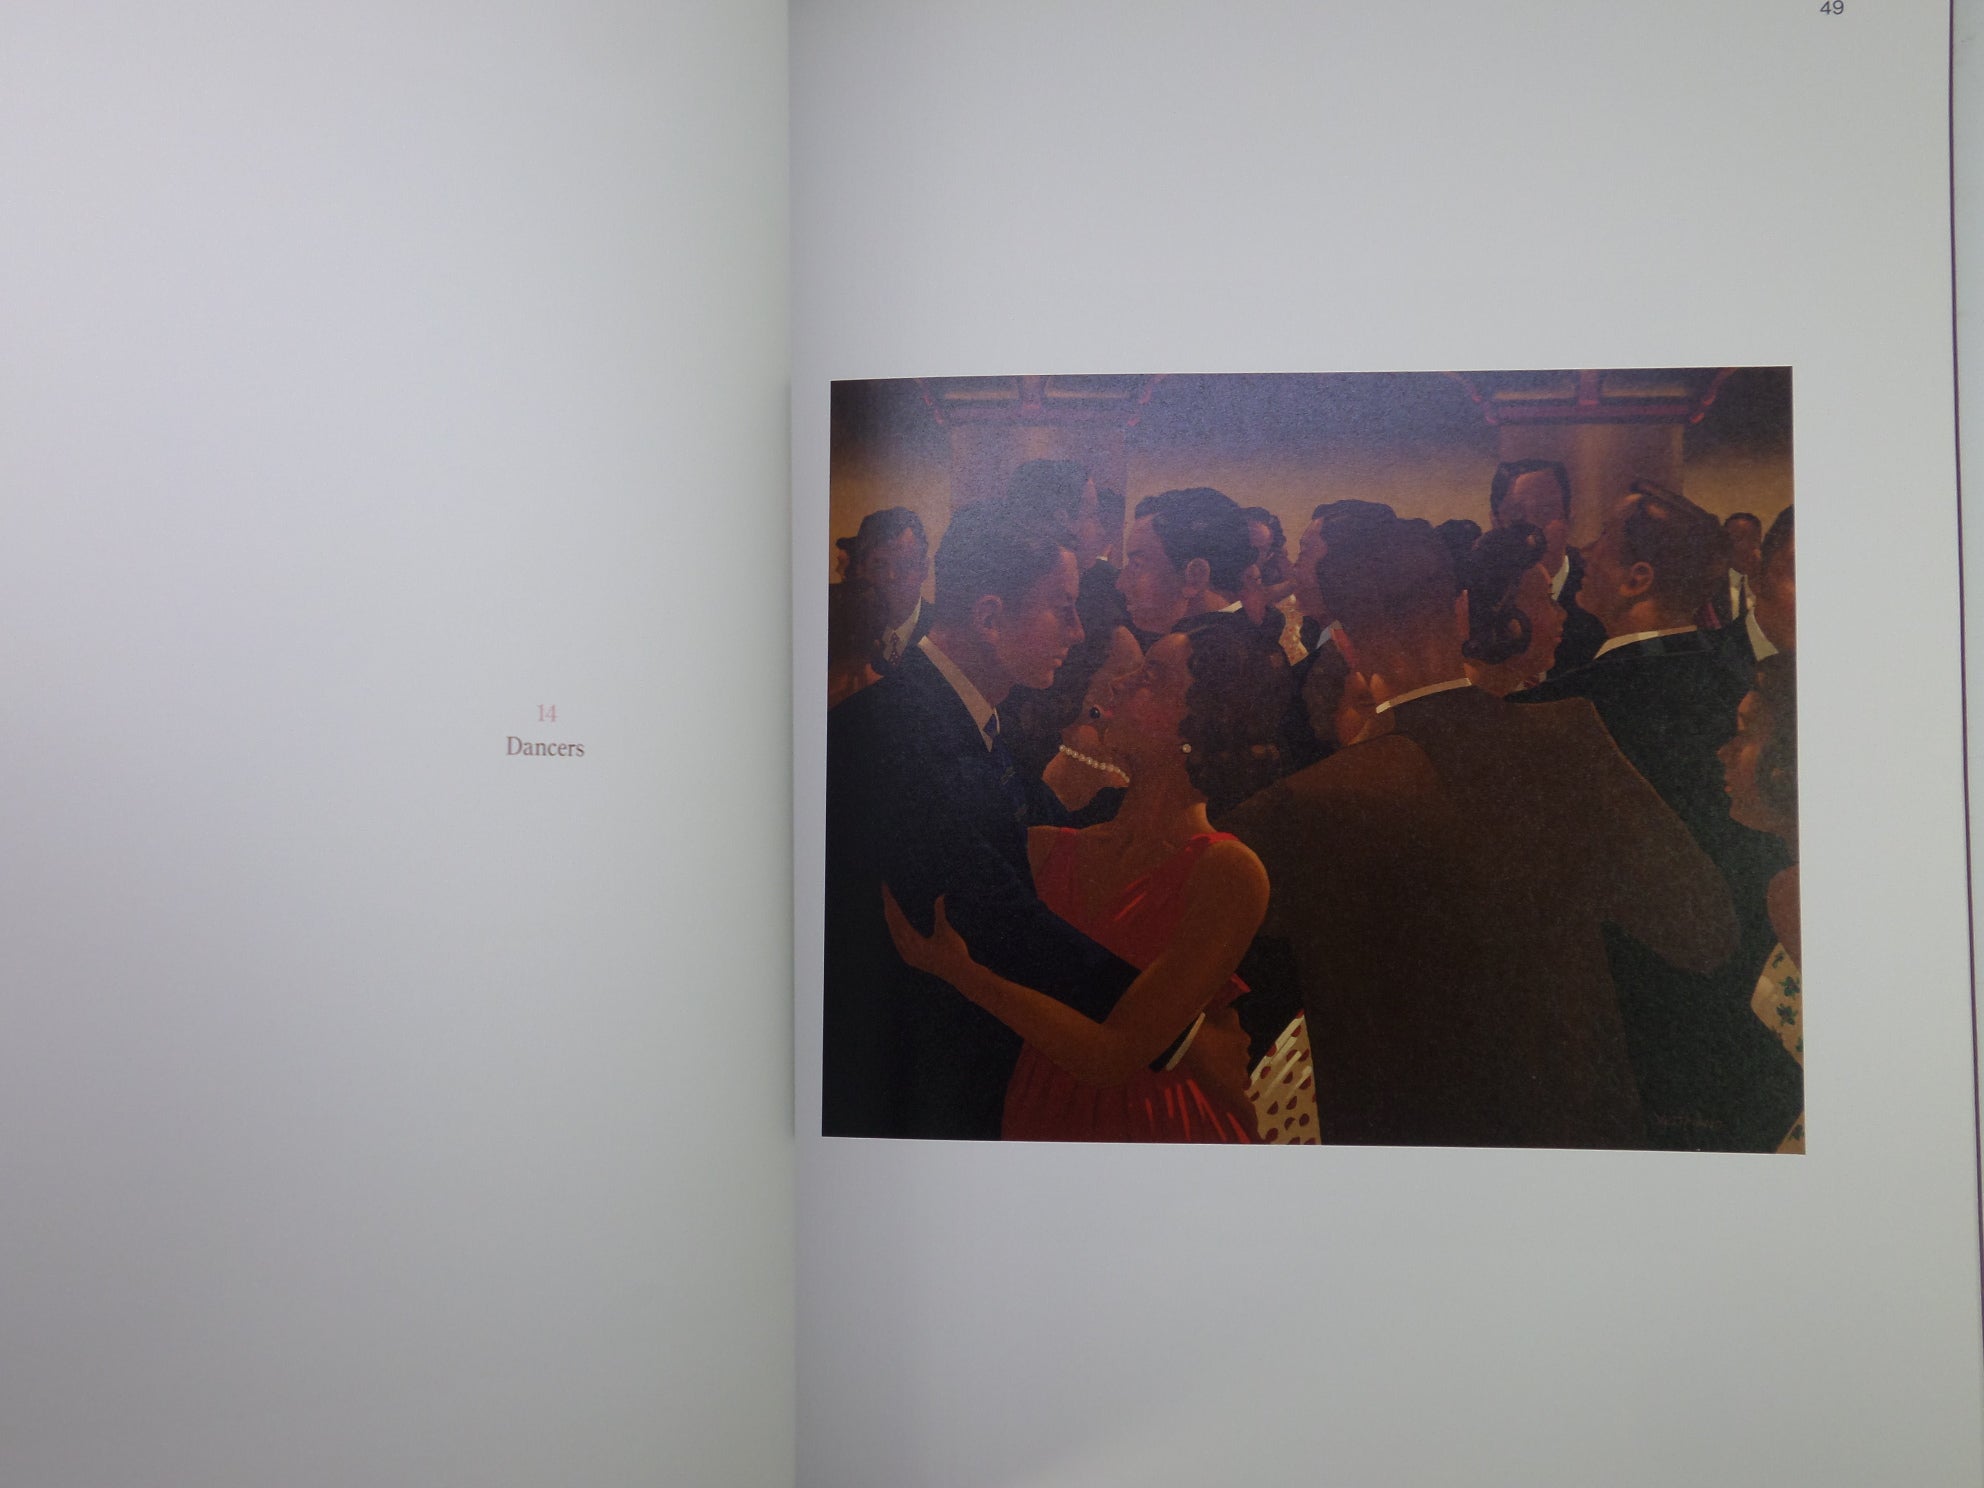 JACK VETTRIANO: THE EARLY YEARS, SIGNED FIRST EDITION [WITH CARRY BAG, PEN & POSTERS]